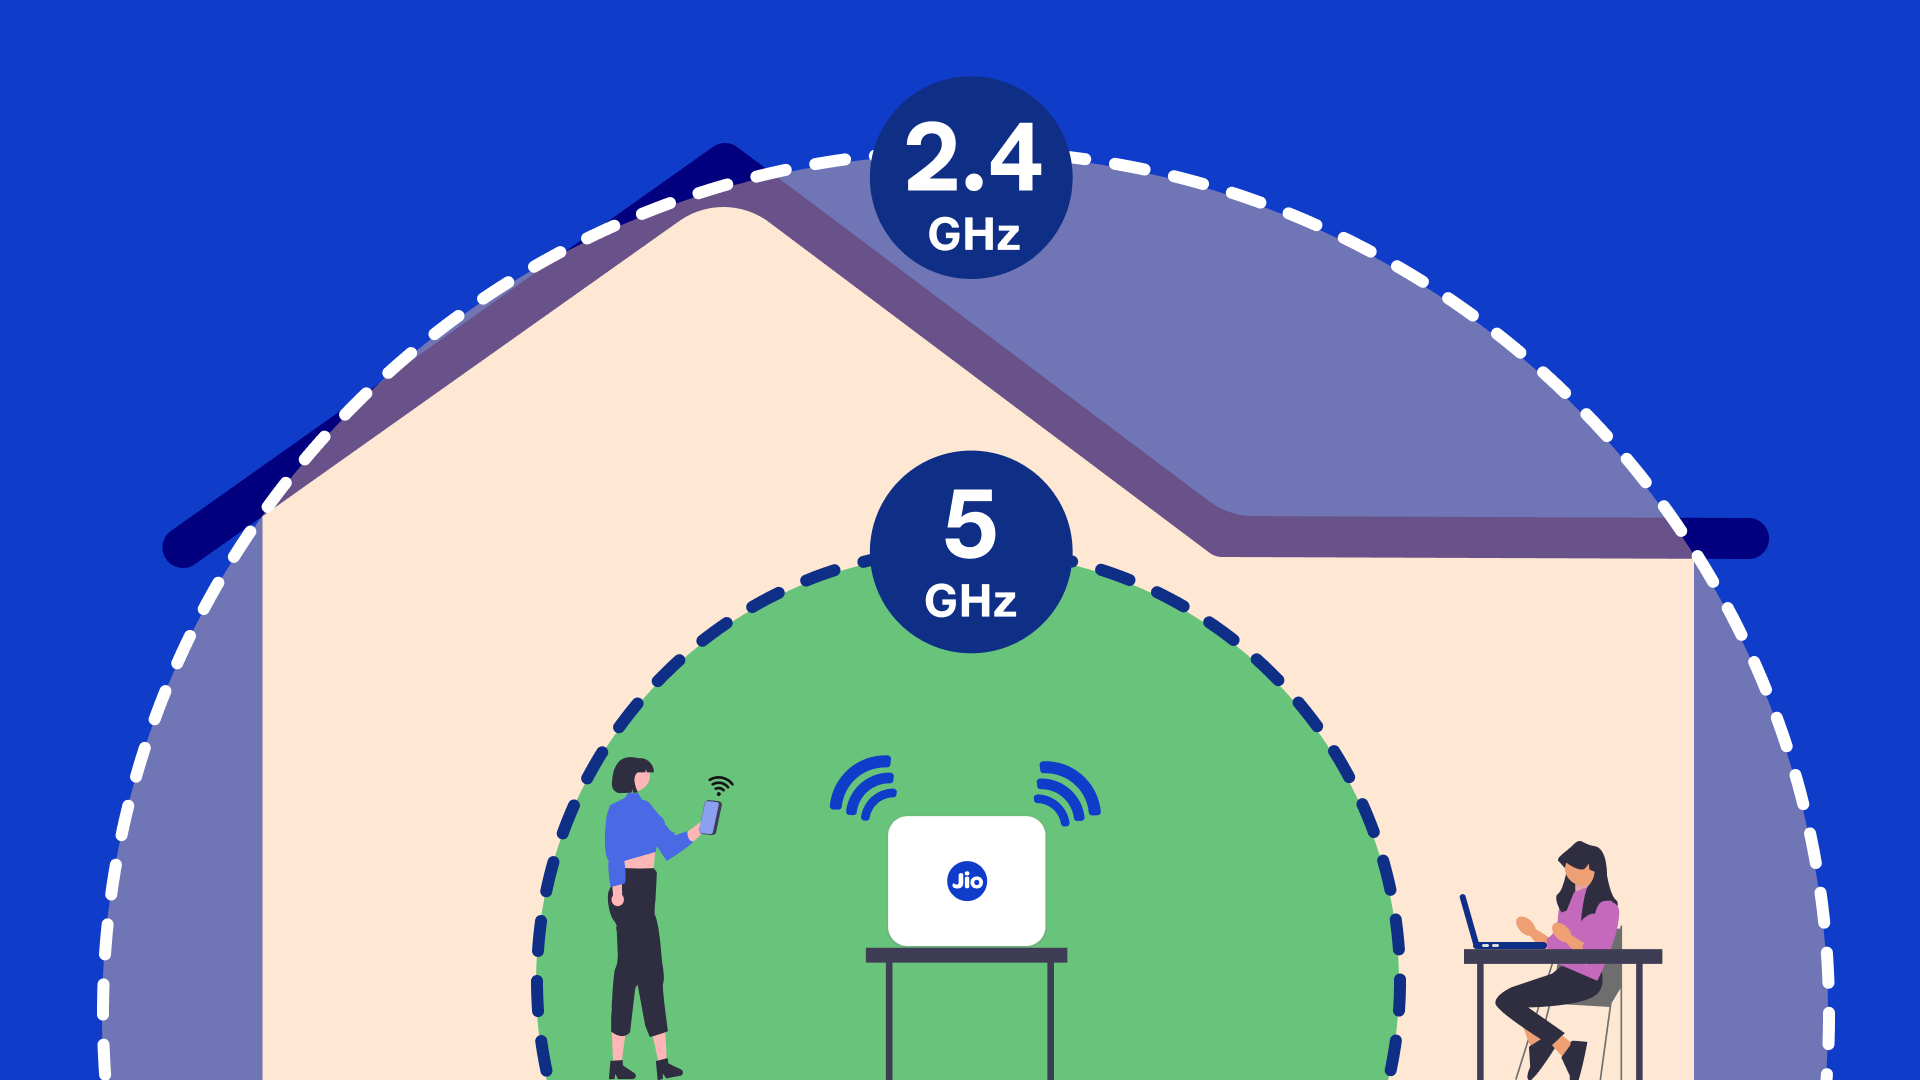 Is 2.4 or 5G Stronger? 